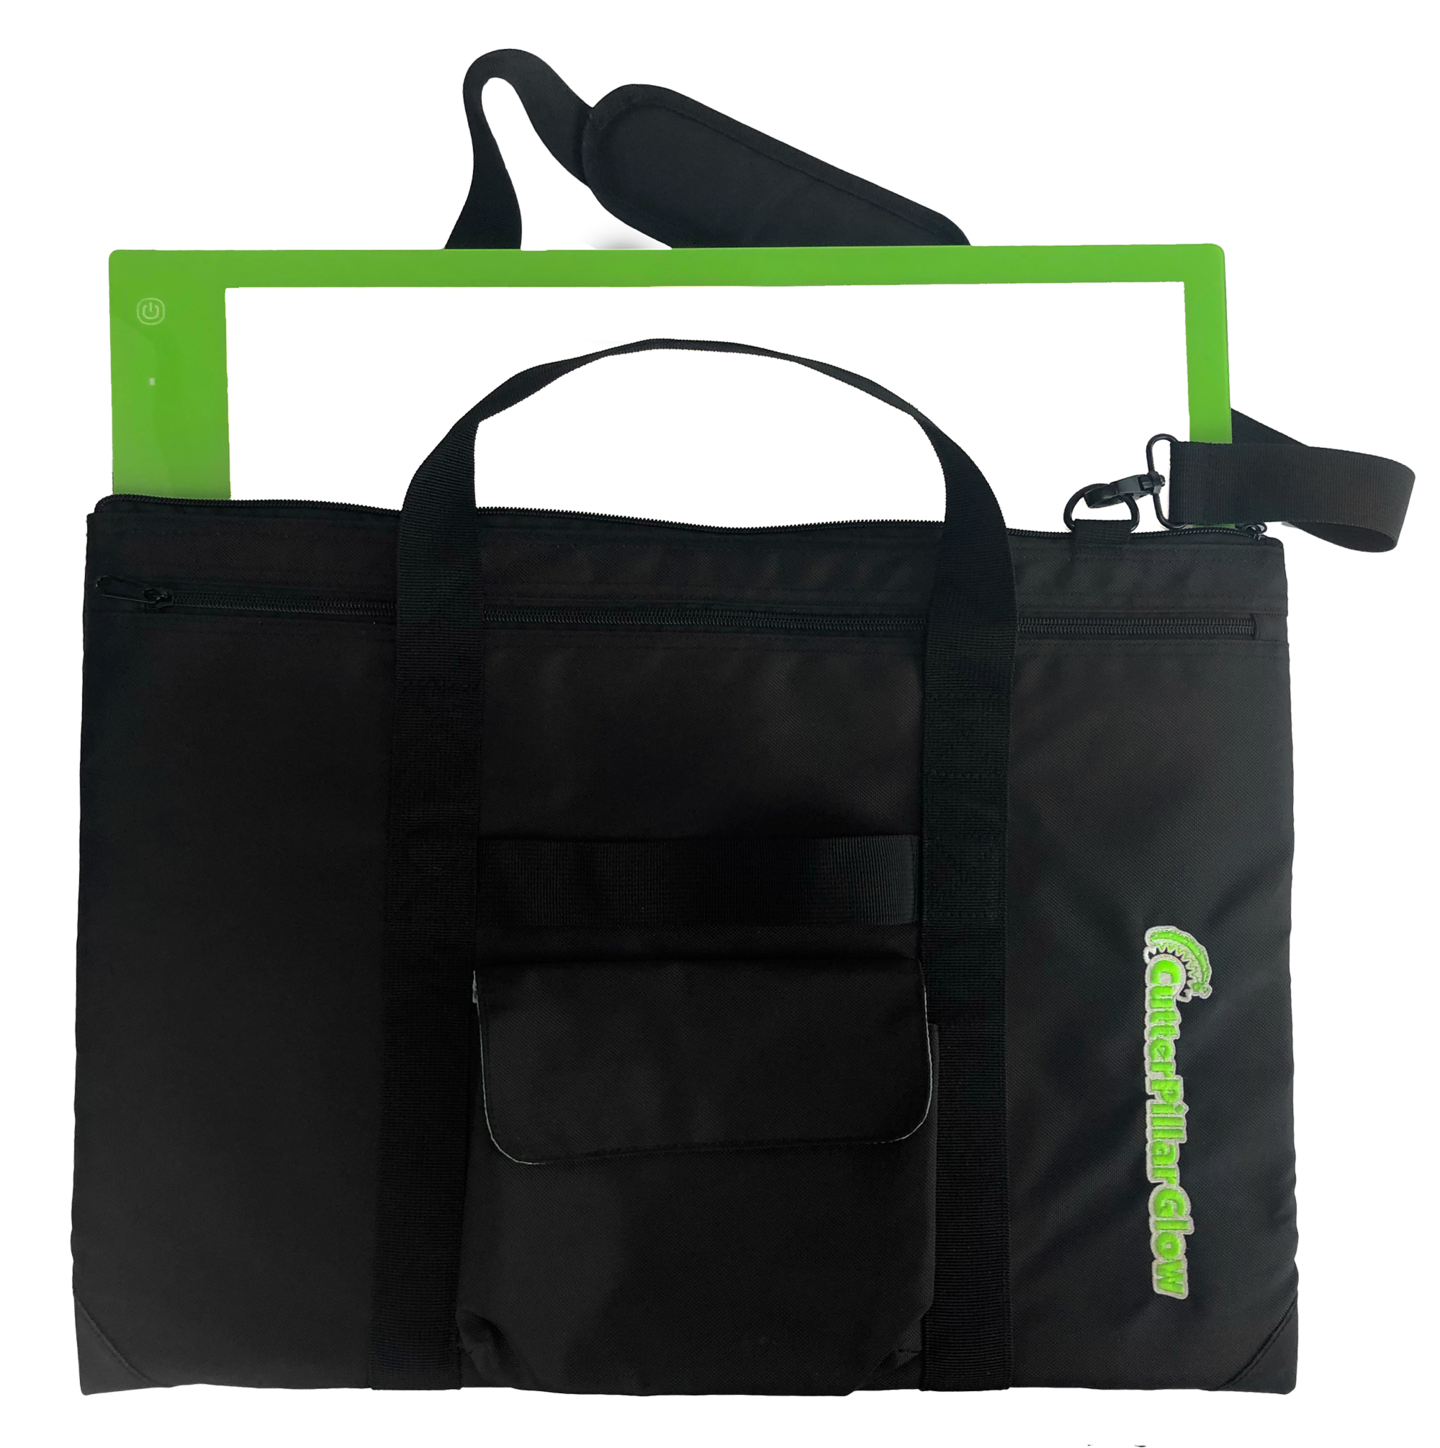 Highly Functional Paded Nylon Bag for Premium-Basic Glows With Shoulder Strap, Zipped Pockets